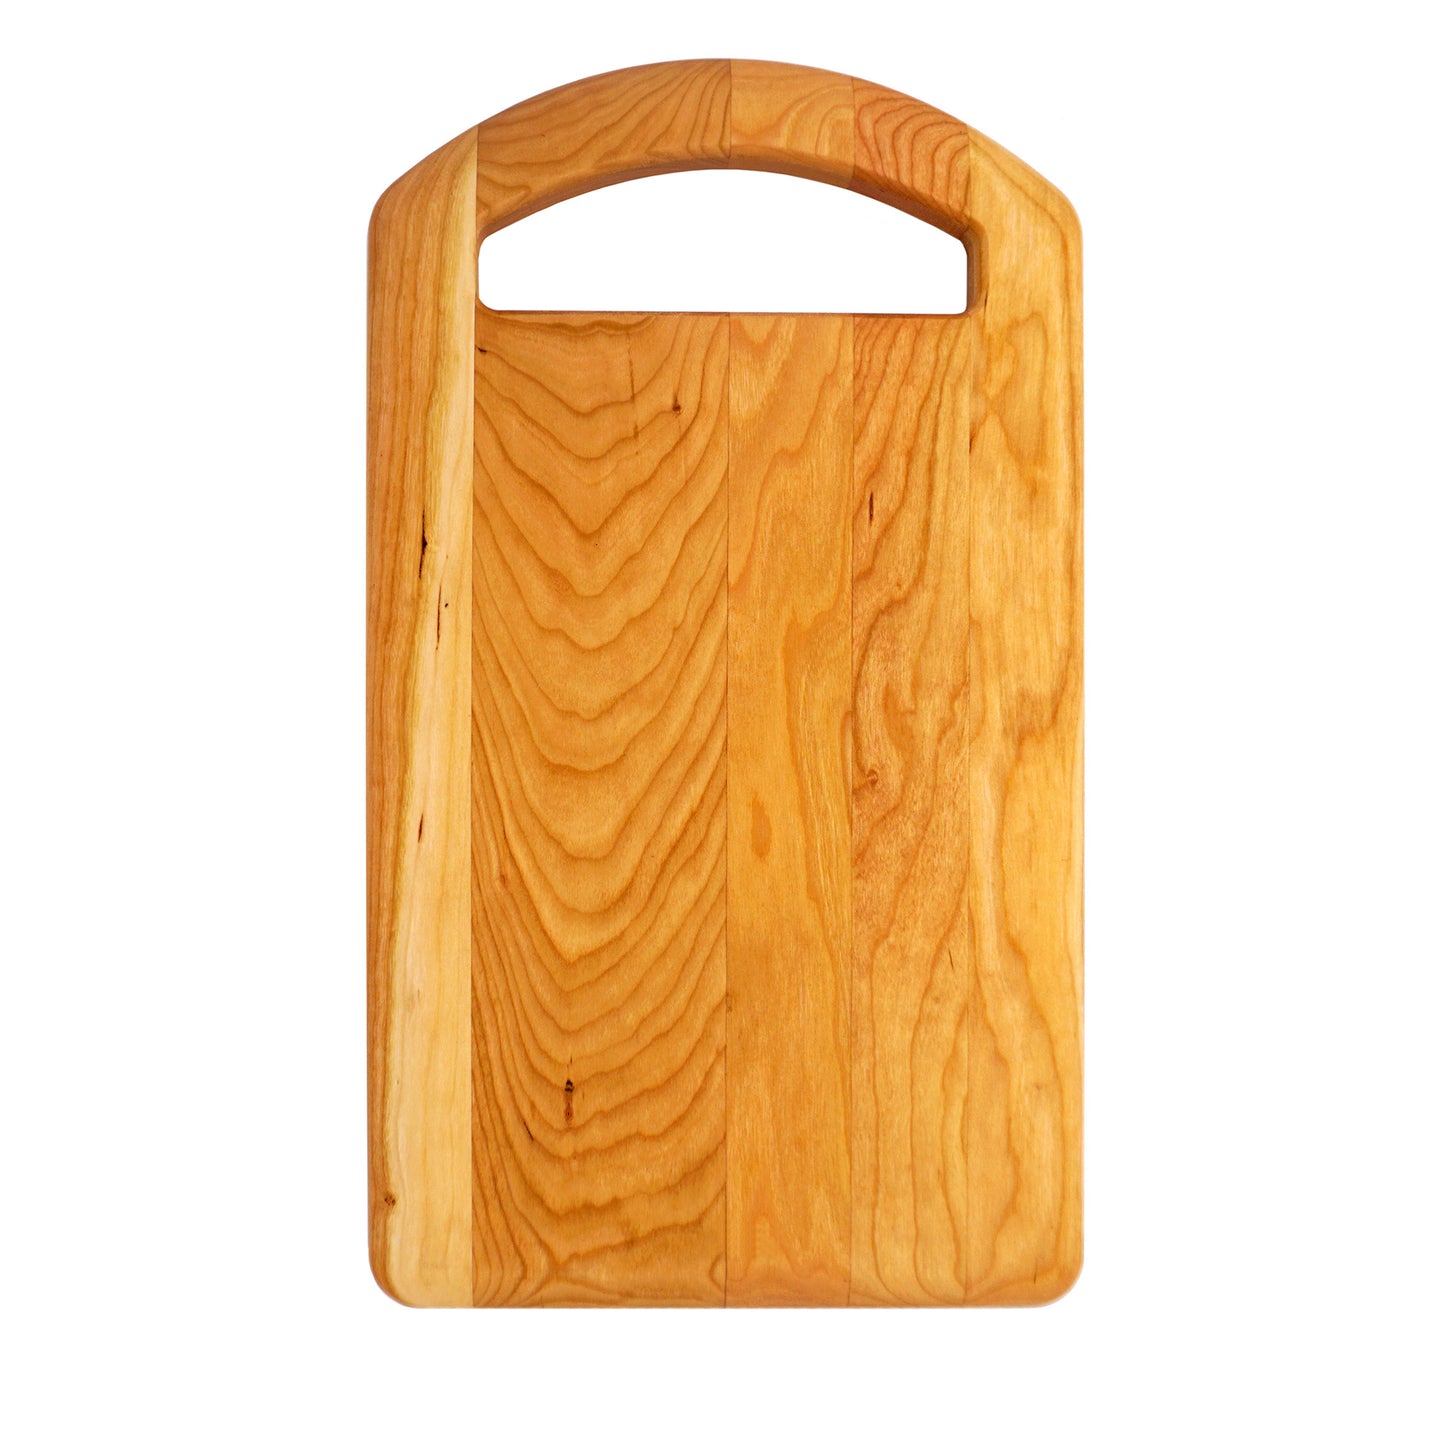 Cherry Prep Board with Oval Handle-18" x 10"